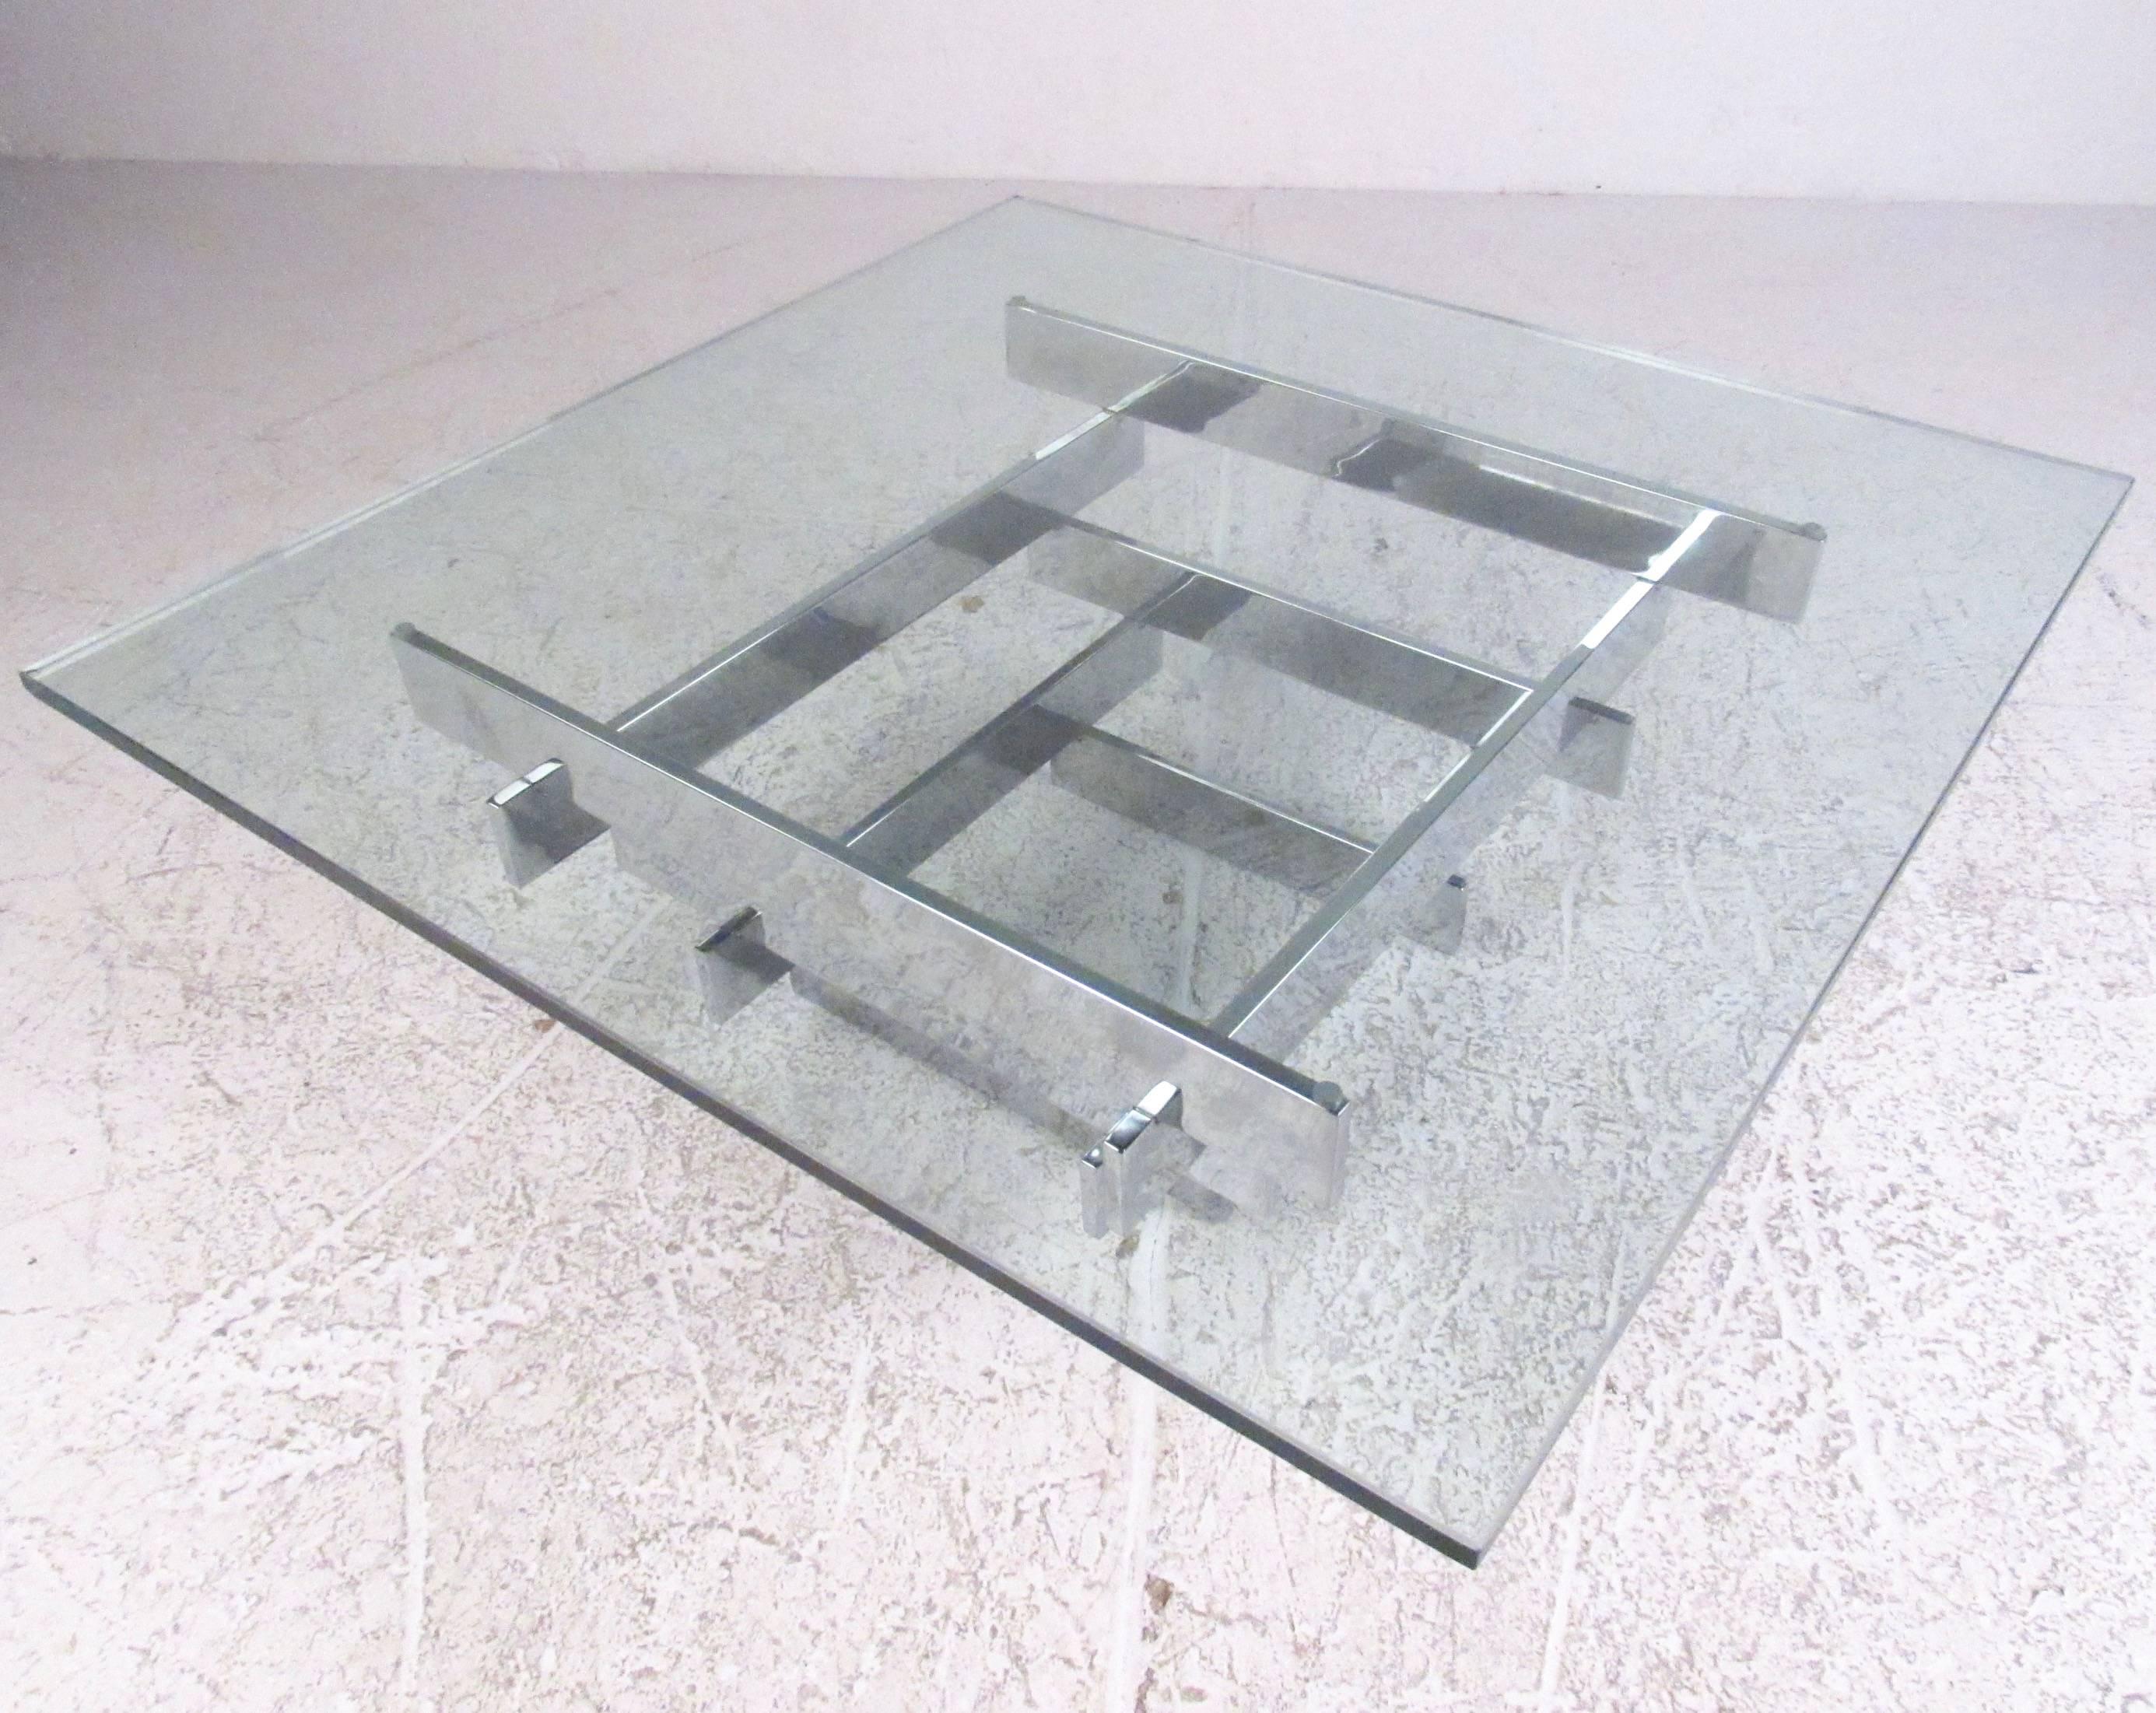 This unique Mid-Century Modern chrome coffee table features stacked chrome slat table base with thick glass top. The stylish vintage design is in the style of the 